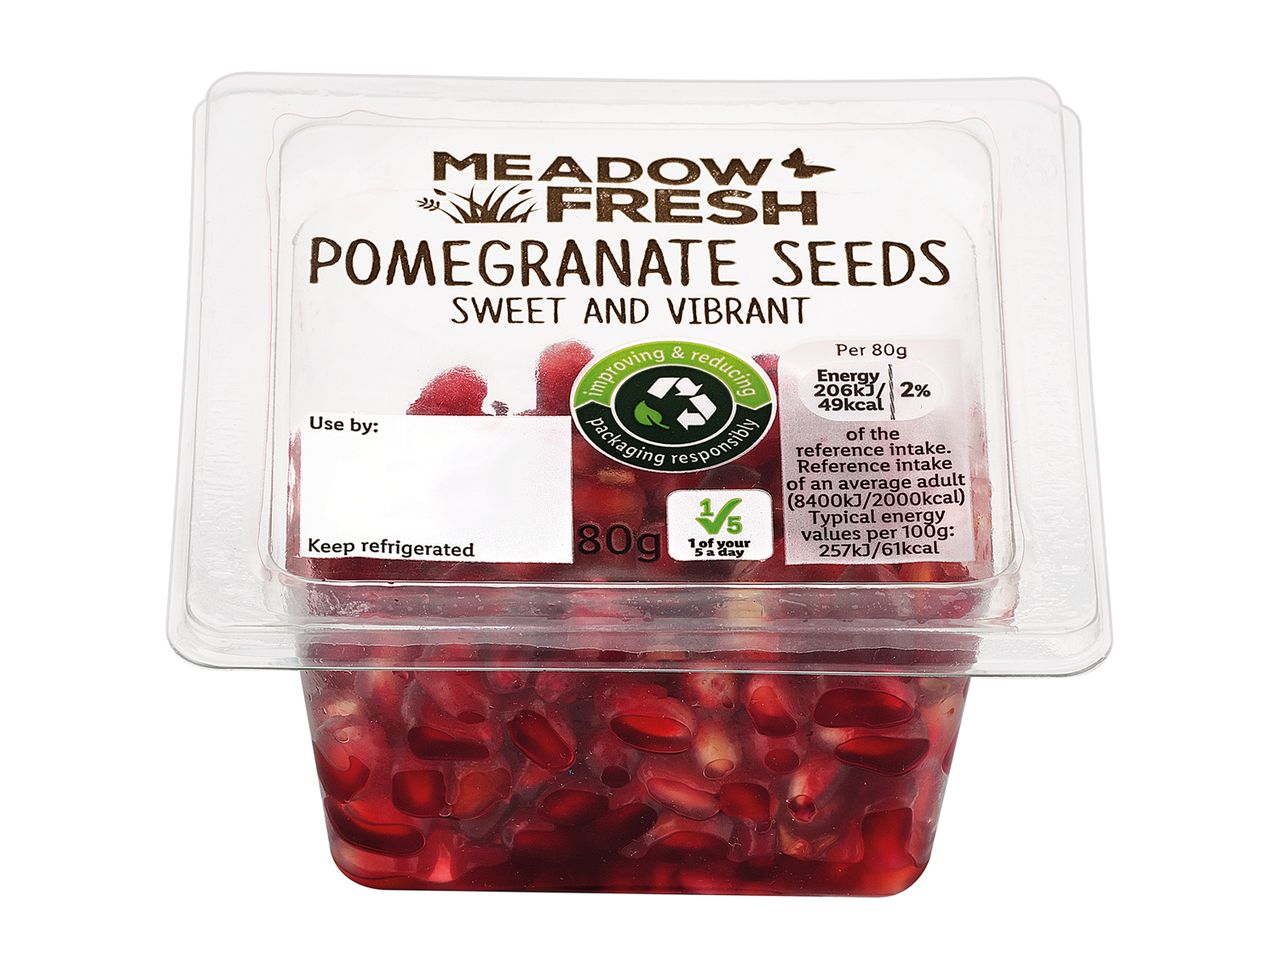 Go to full screen view: Meadow Fresh Pomegranate Seeds - Image 1